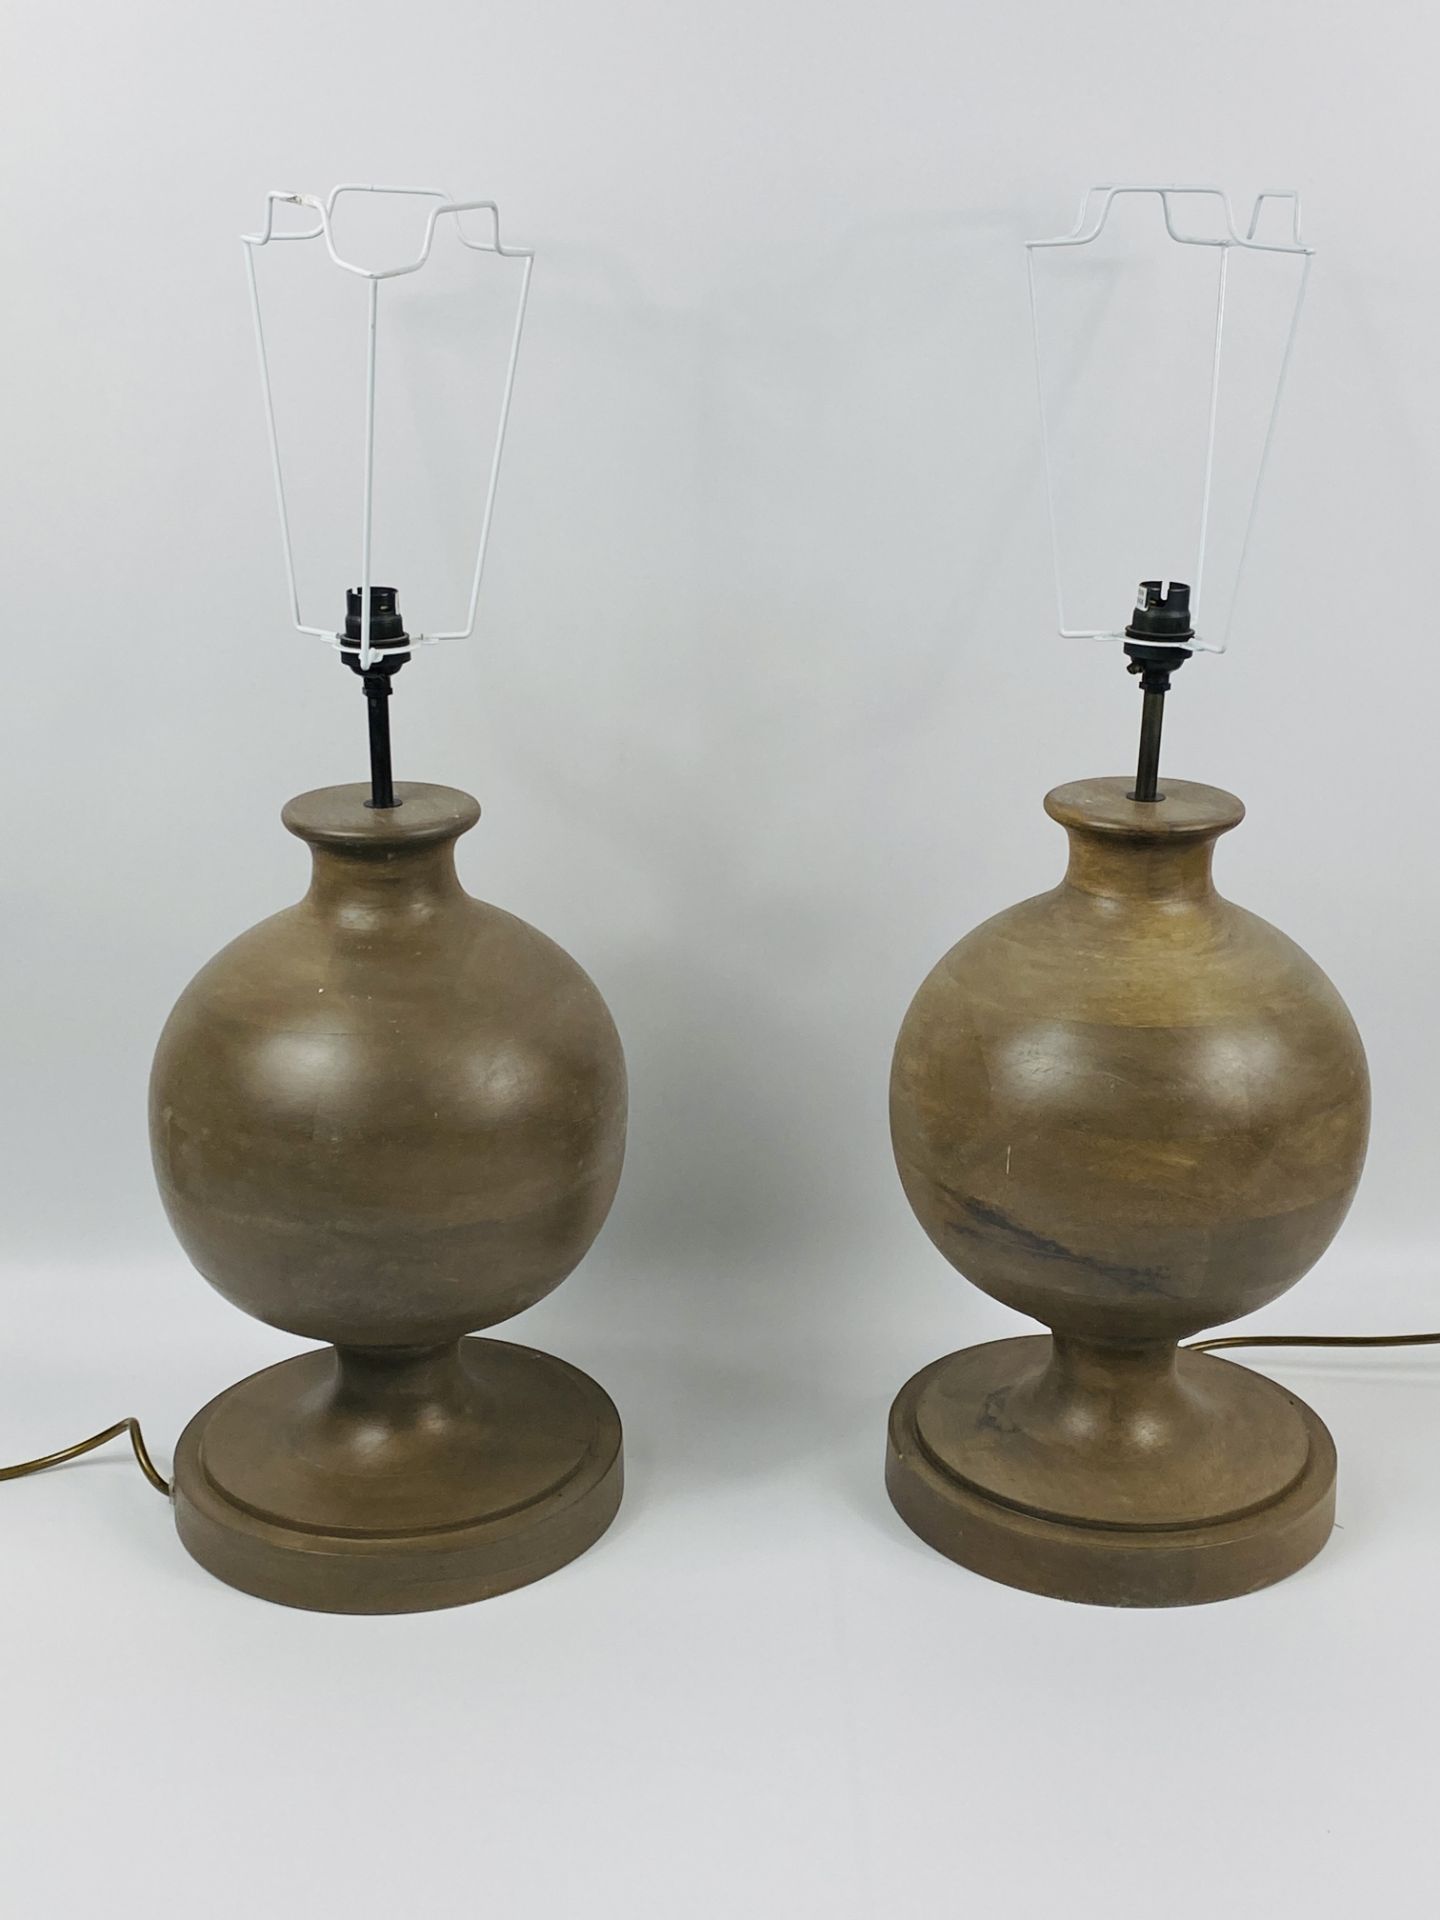 Pair of ceramic table lamps - Image 5 of 5